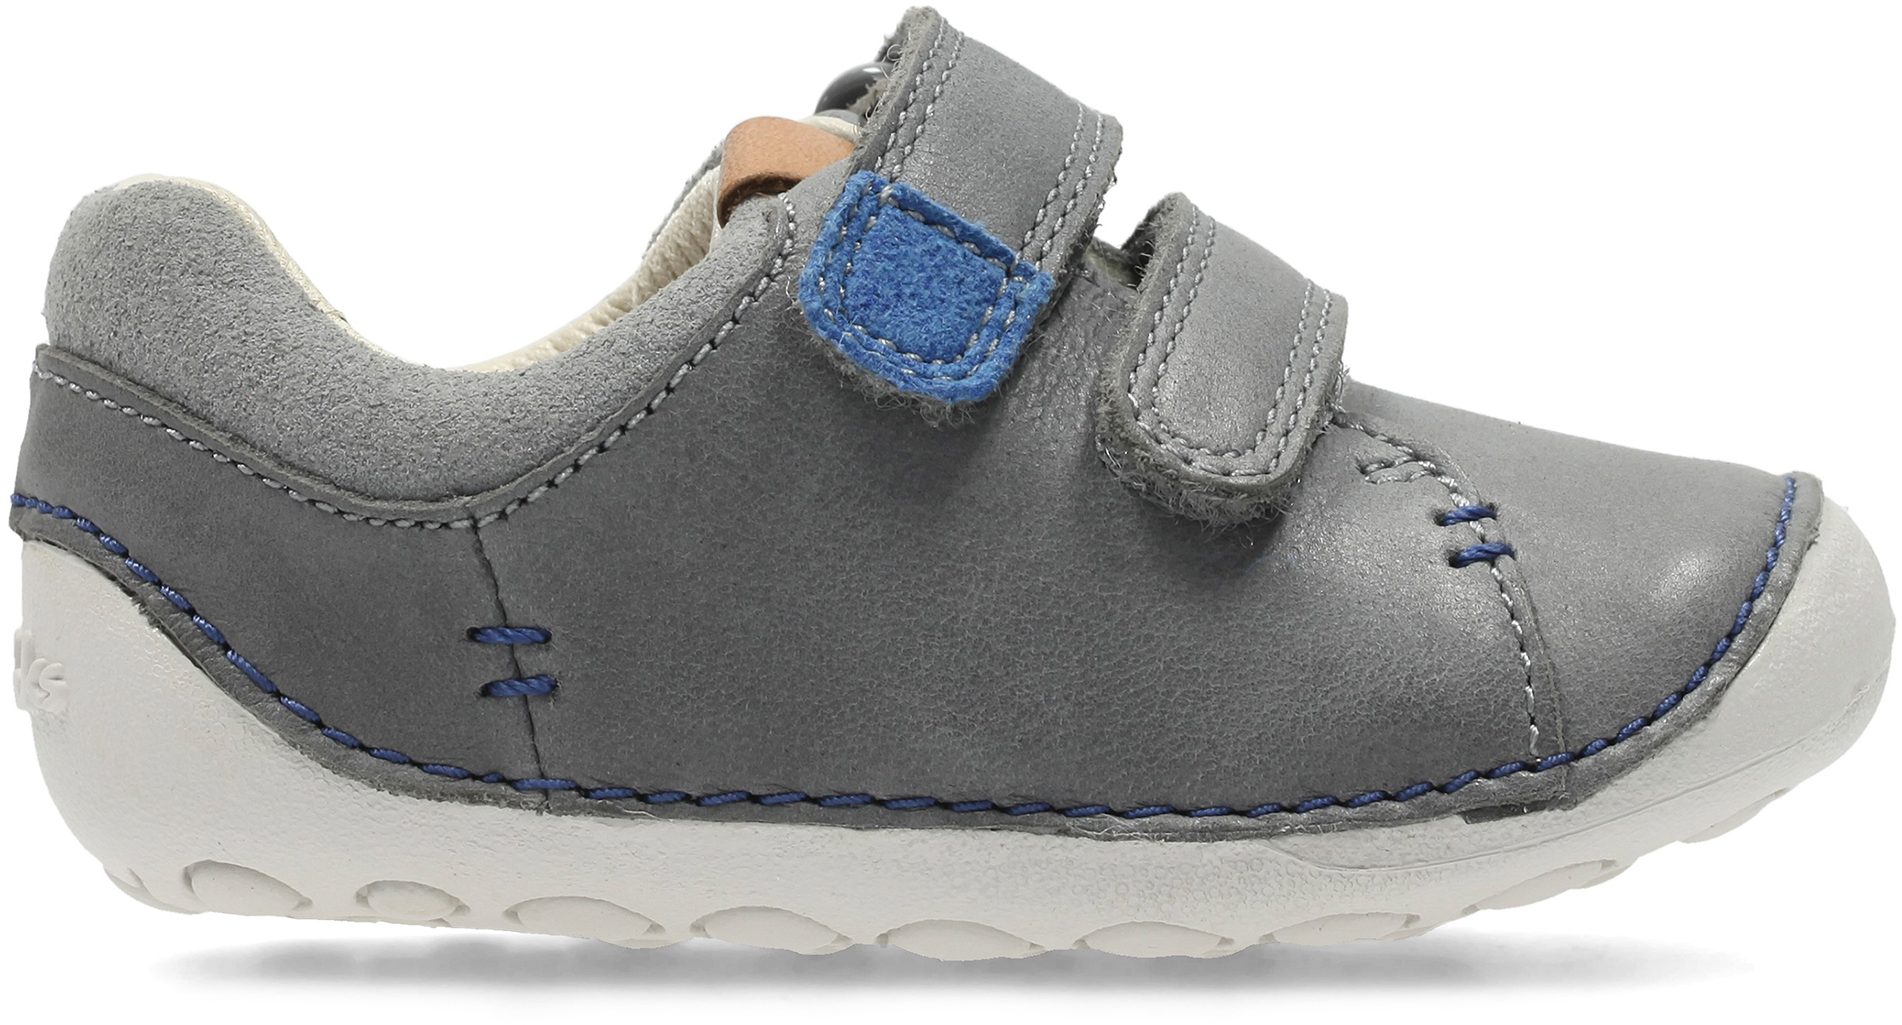 Clarks Tiny Toby Grey Leather 26133103 - Boys Shoes - Humphries Shoes